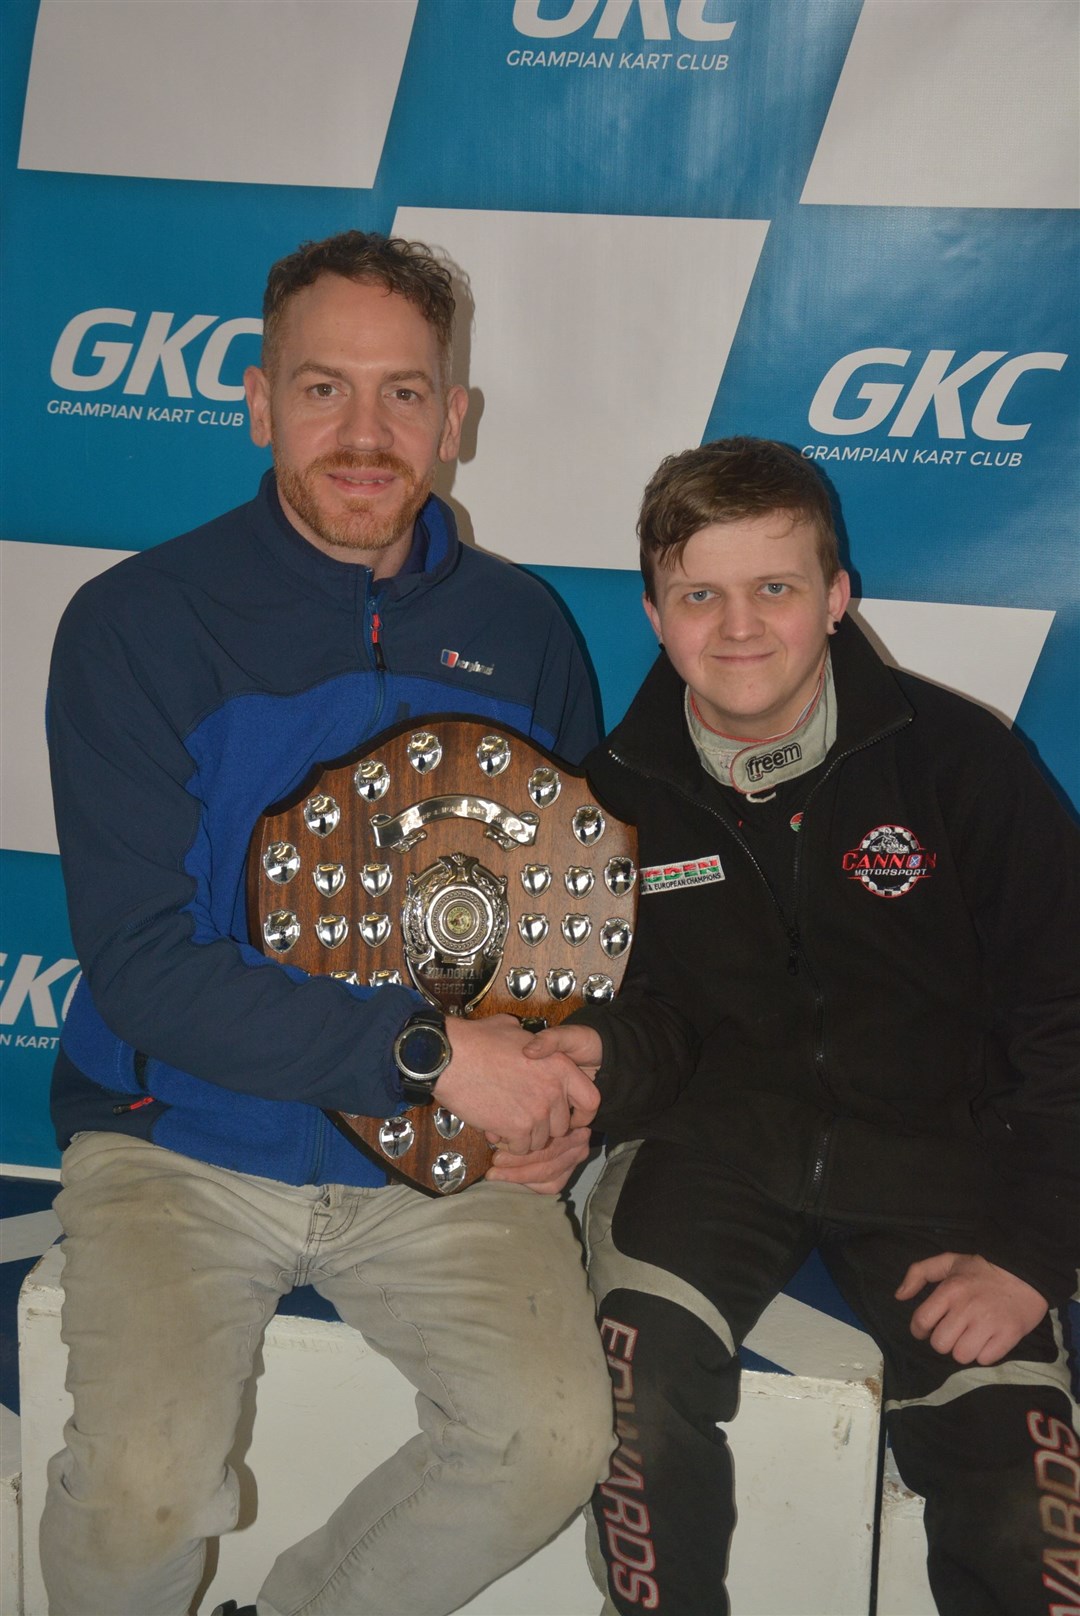 Gary Williams and Jonathan Edwards who shared the Kildonan Shield. Both had the perfect score by winning all three heats and their respective finals